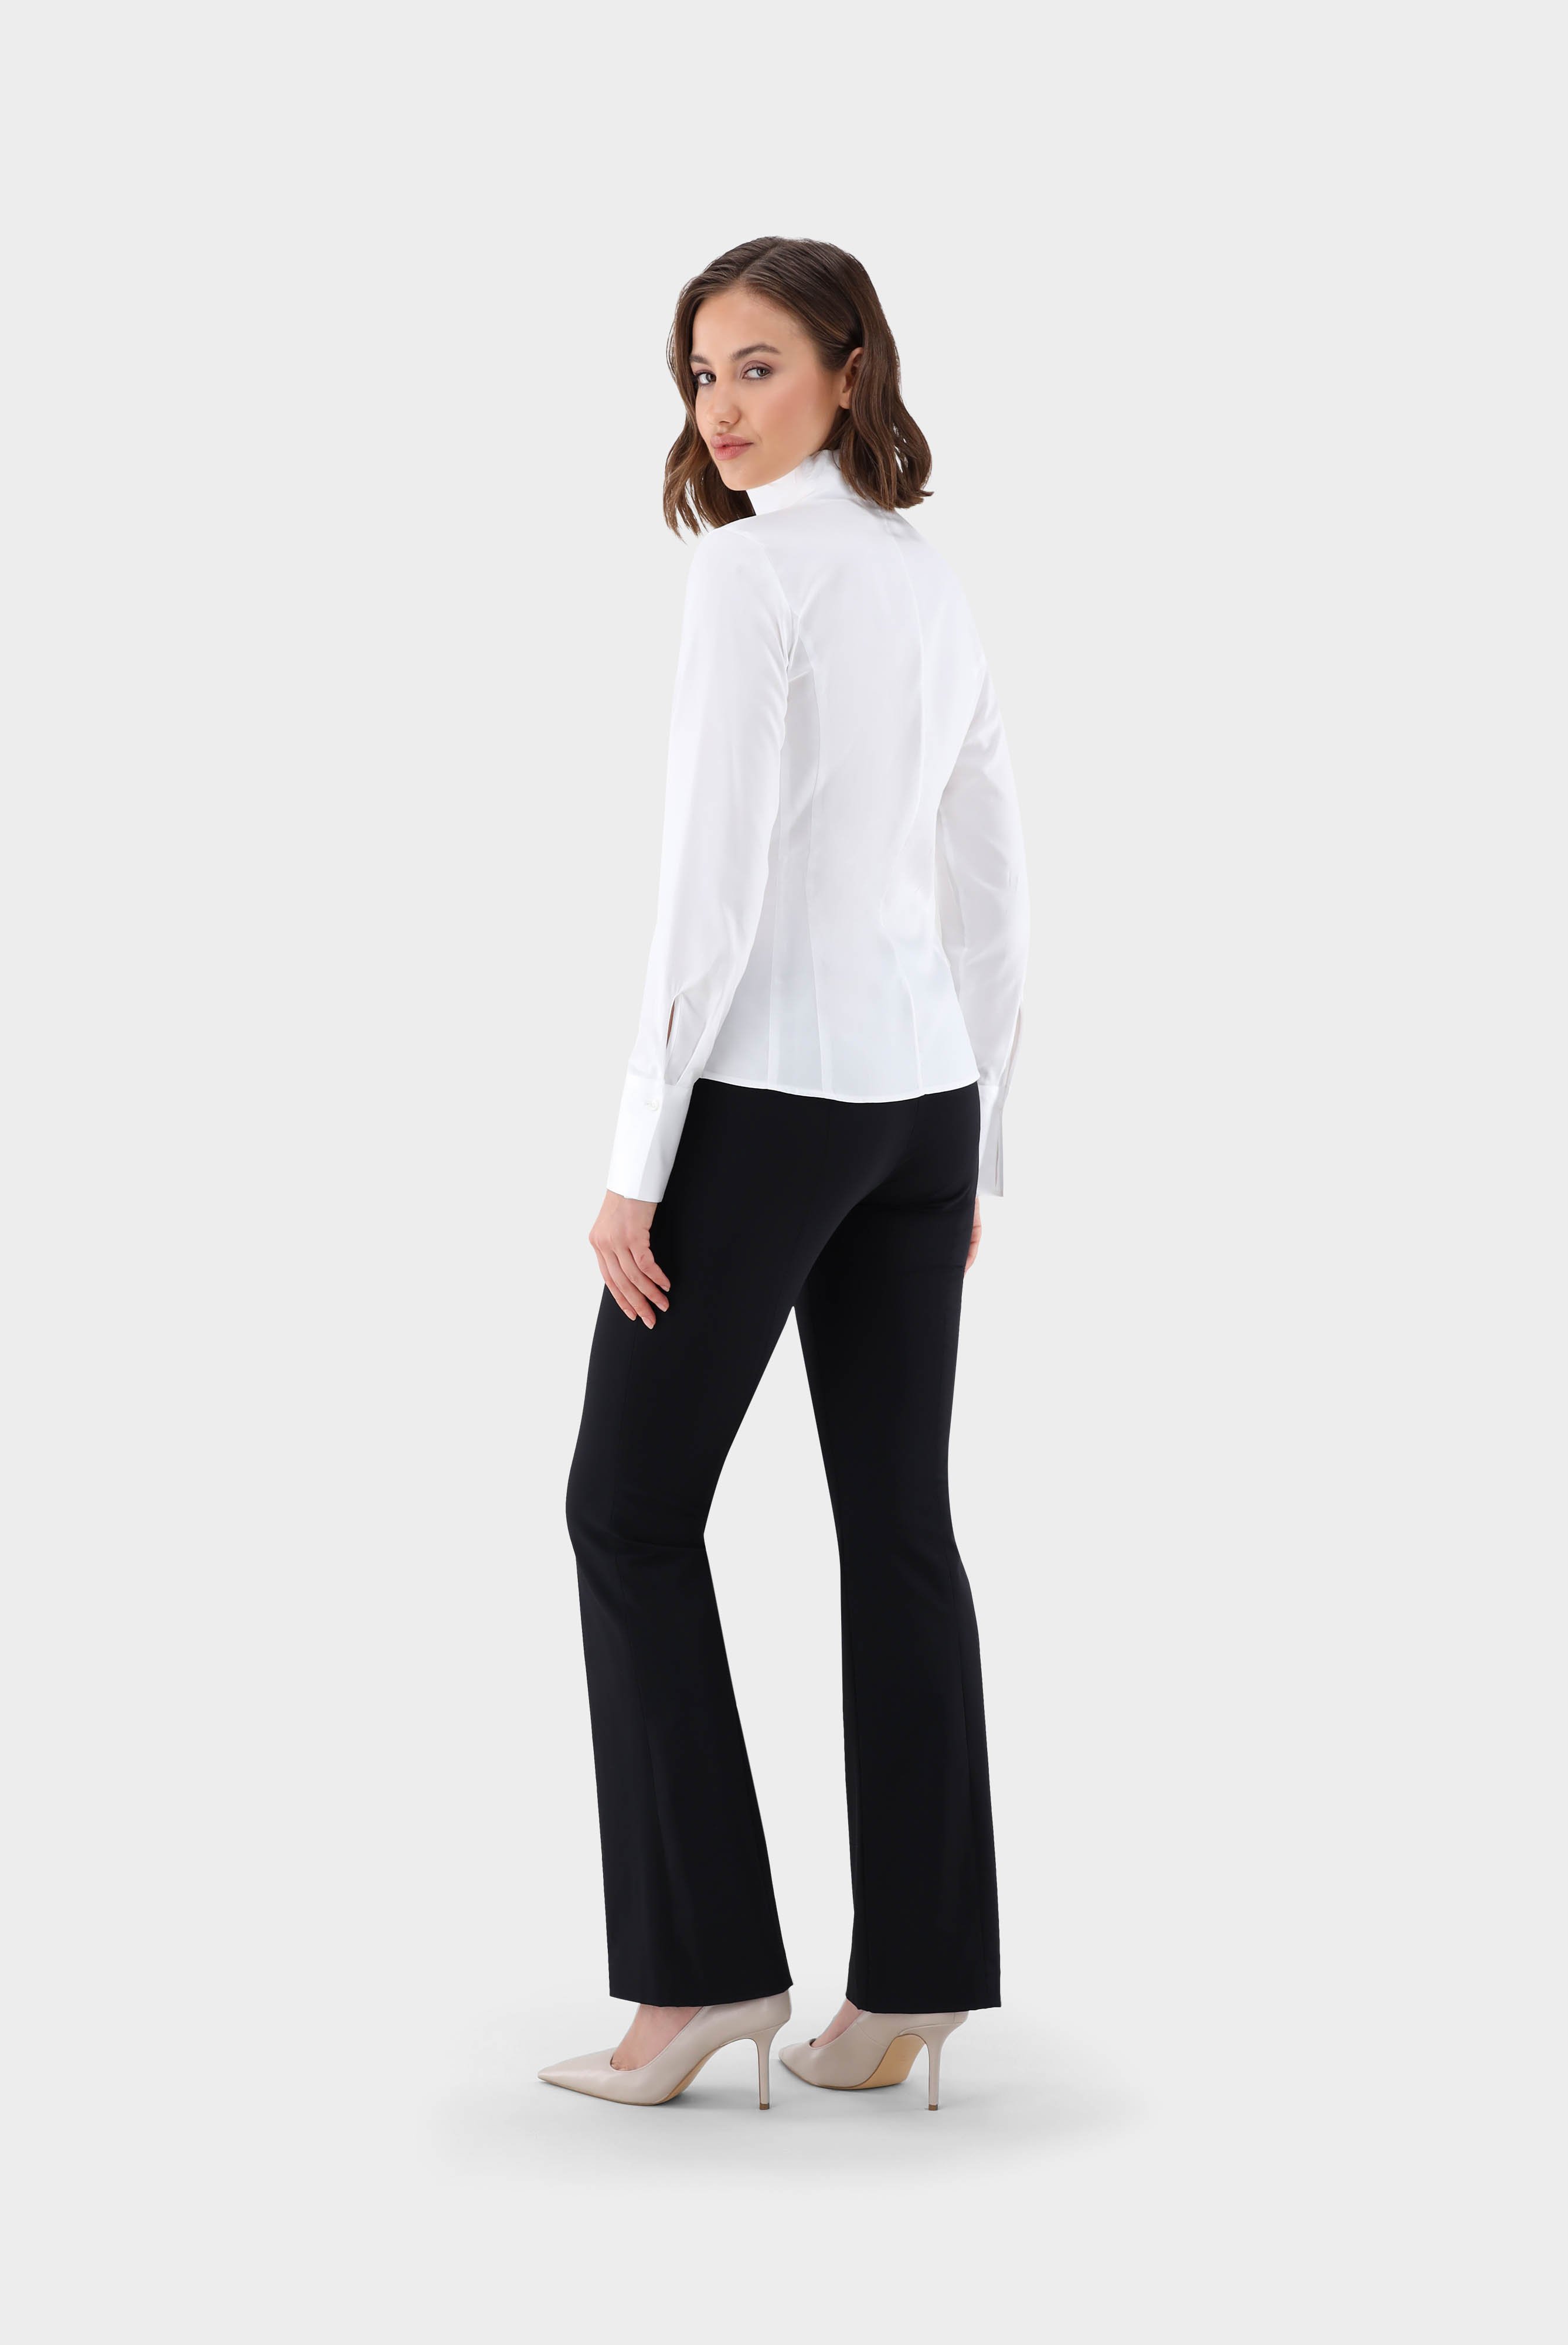 Business Blouses+Twill Chalice Collar Blouse+05.3612.73.130148.000.44